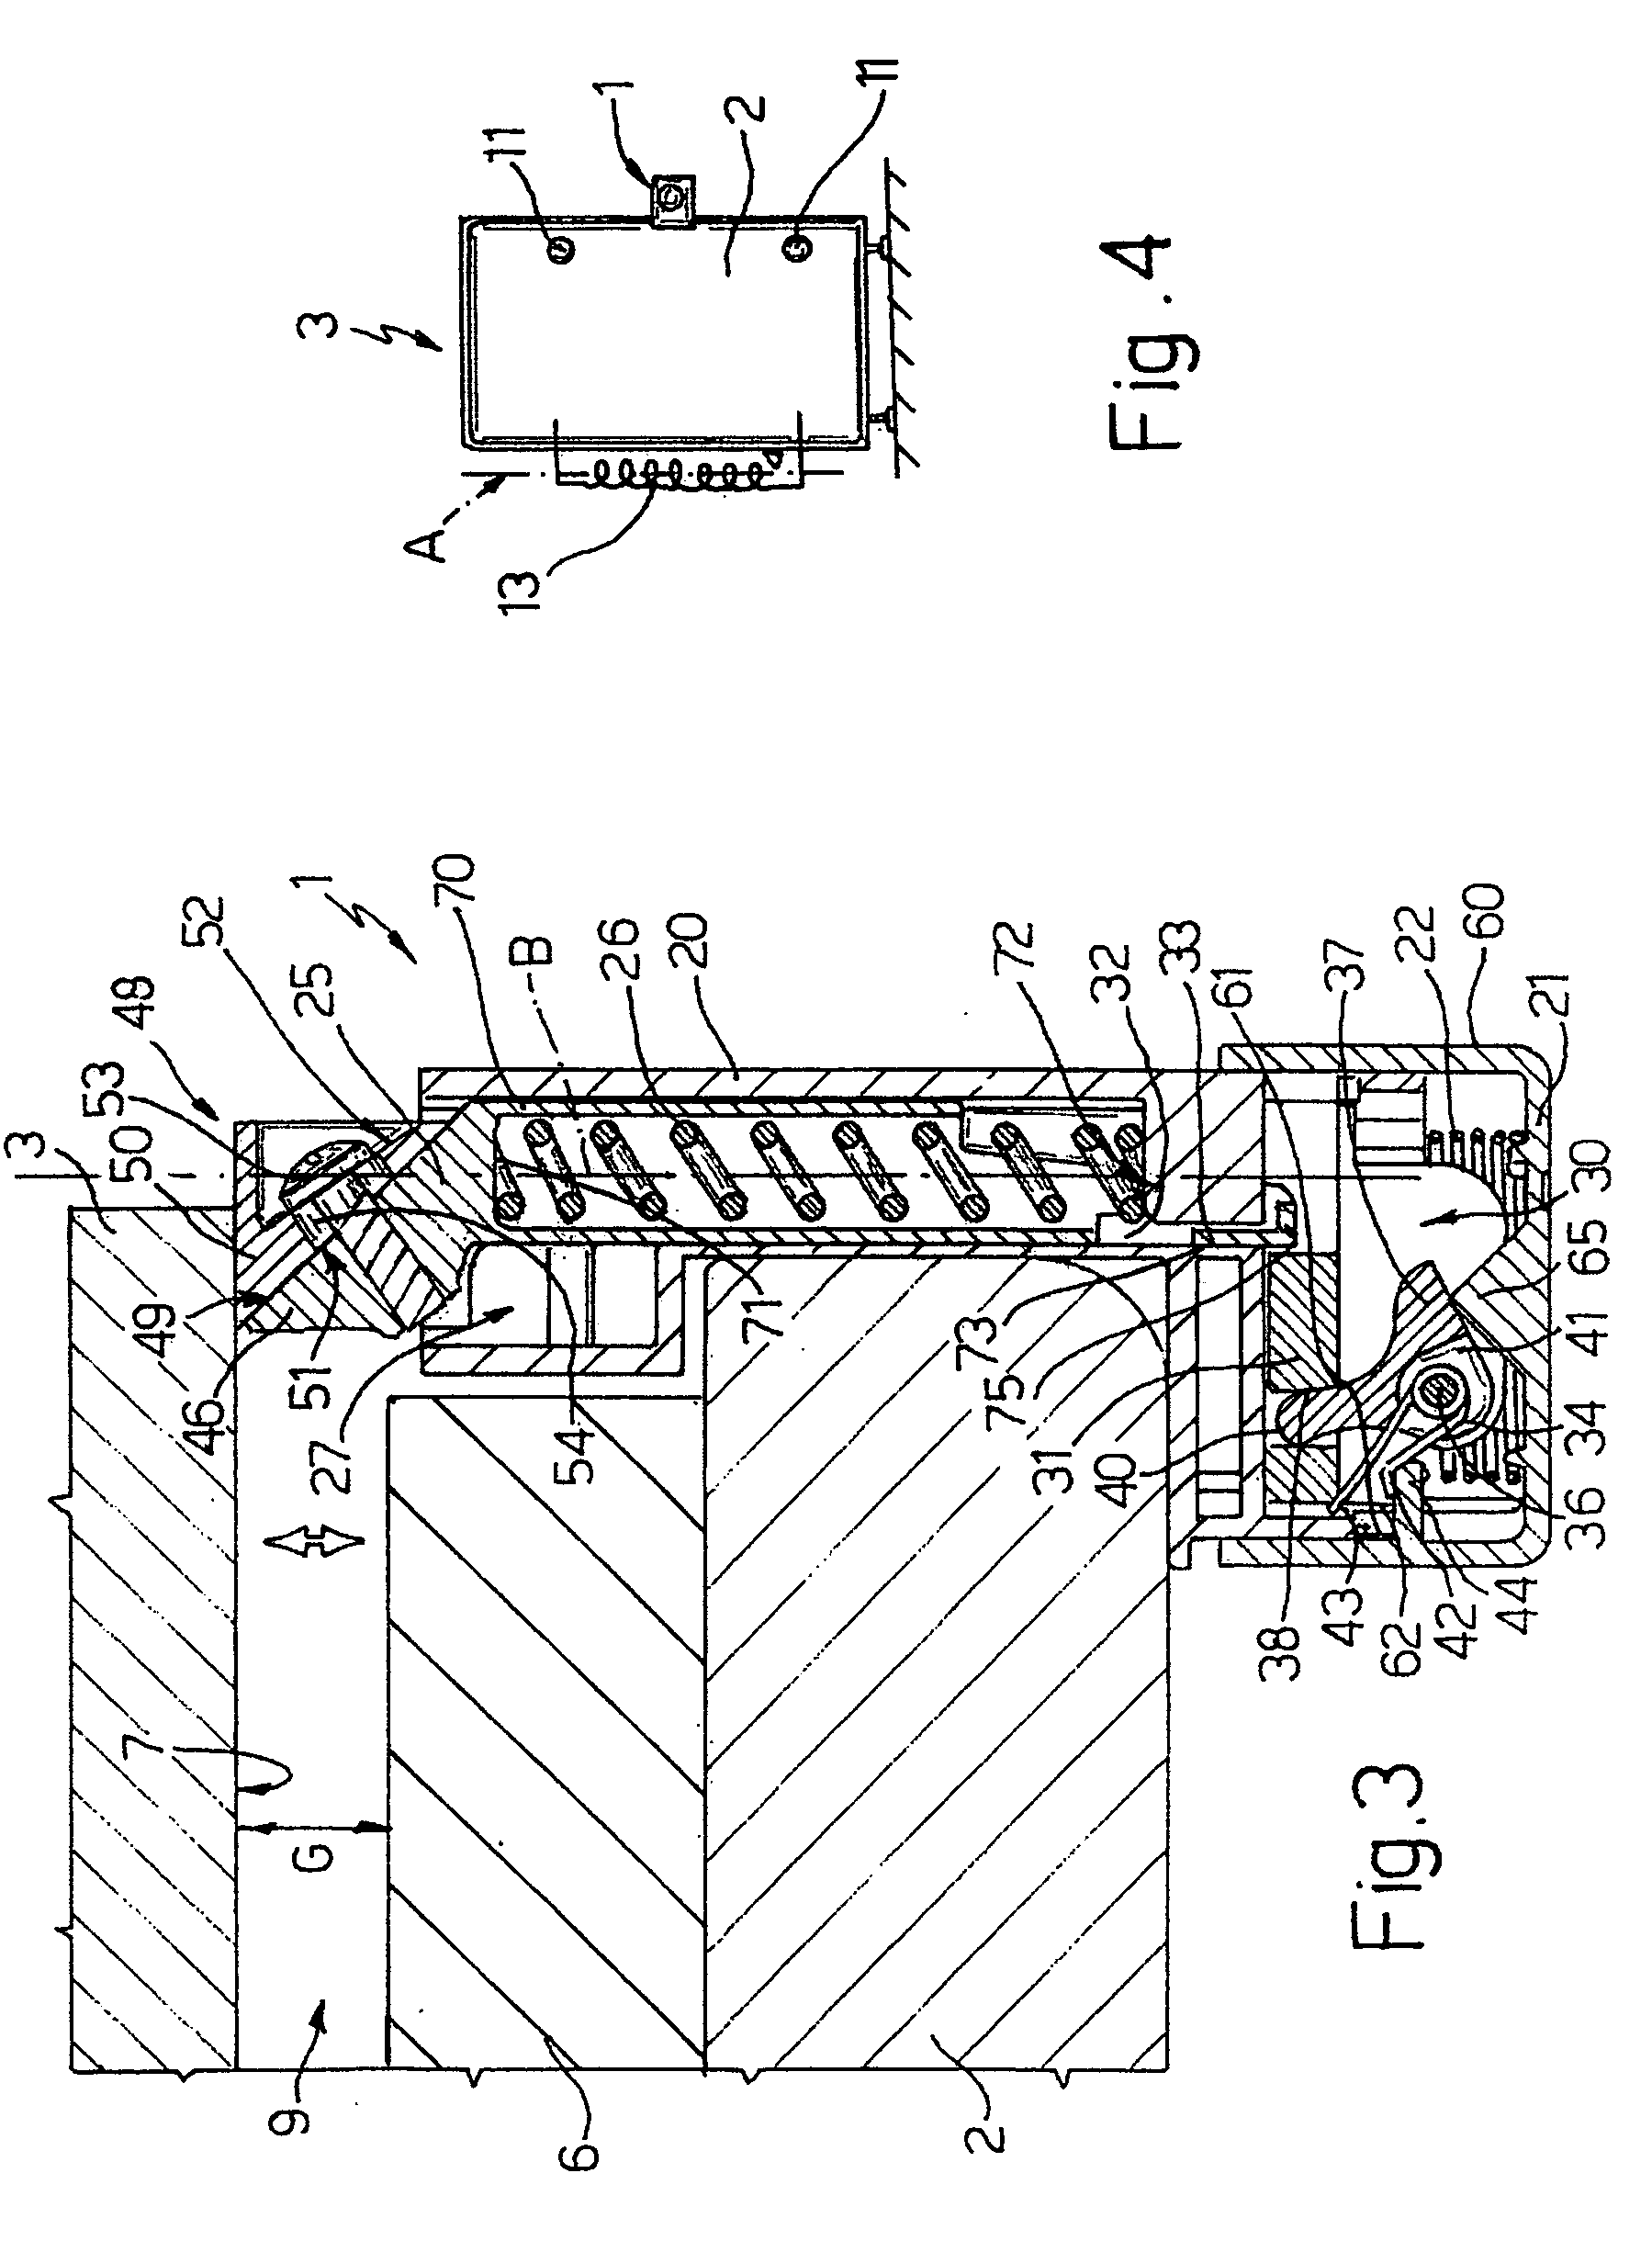 Device for opening a door of an electric household appliance, in particular a refrigerator or freezer